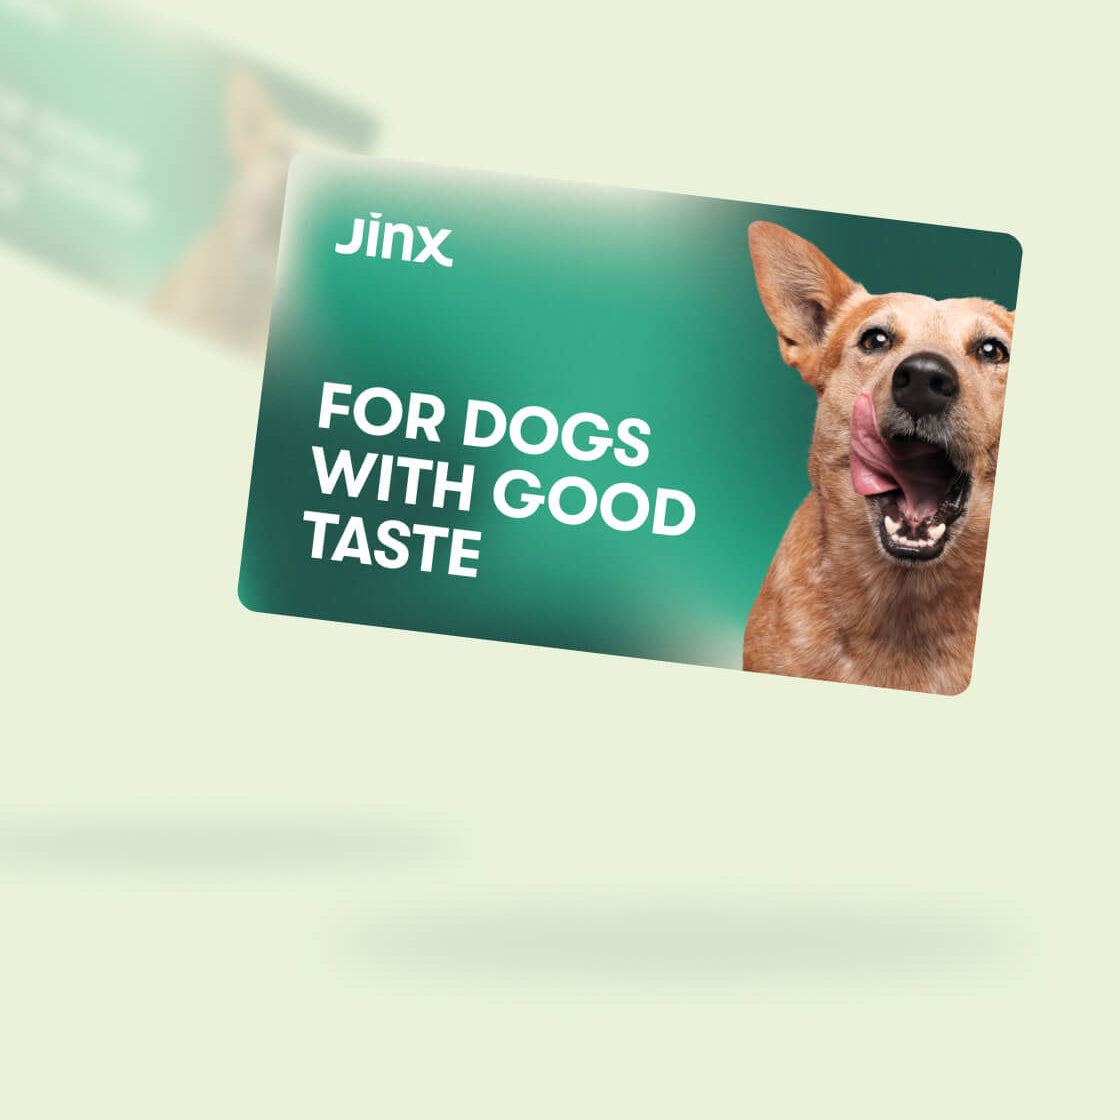 Jinx E-Gift Card with a dog licking it's lips on one side and for dogs with good taste text on the other on a green background.